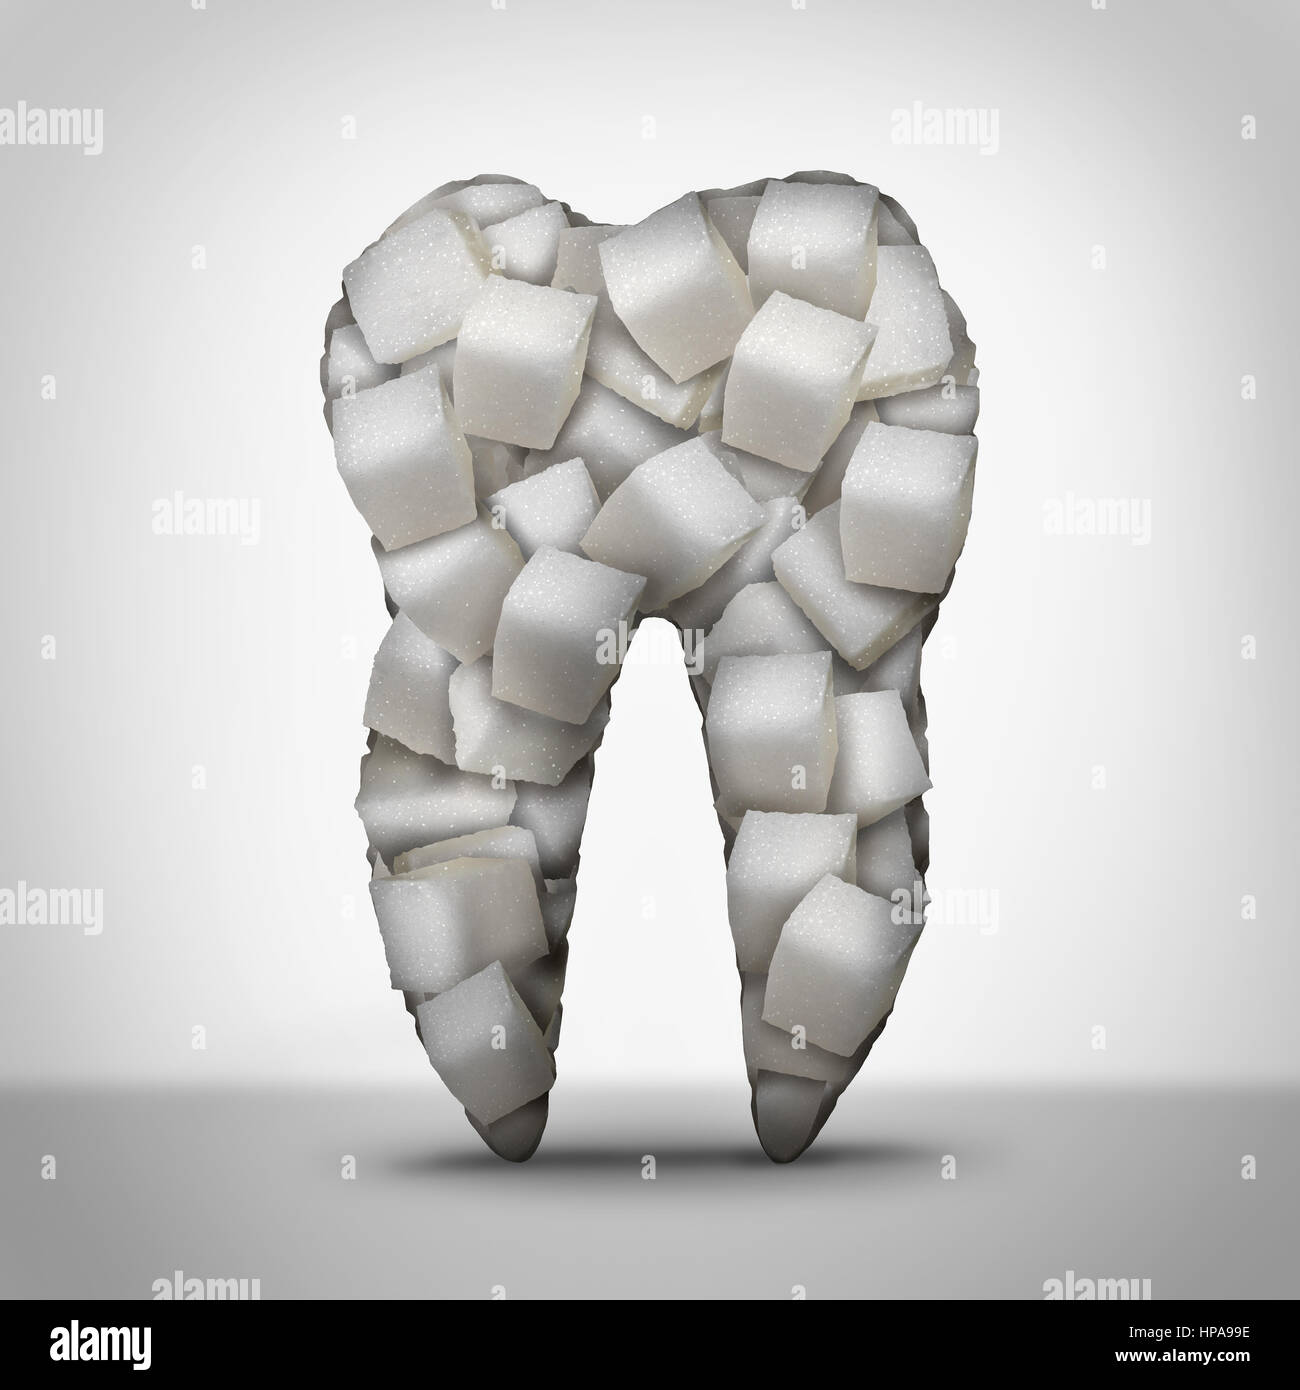 Teeth sugar dentist symbol and dentistry concept as a molar tooth made of cubes of refined white candy sweetness as an oral care. Stock Photo